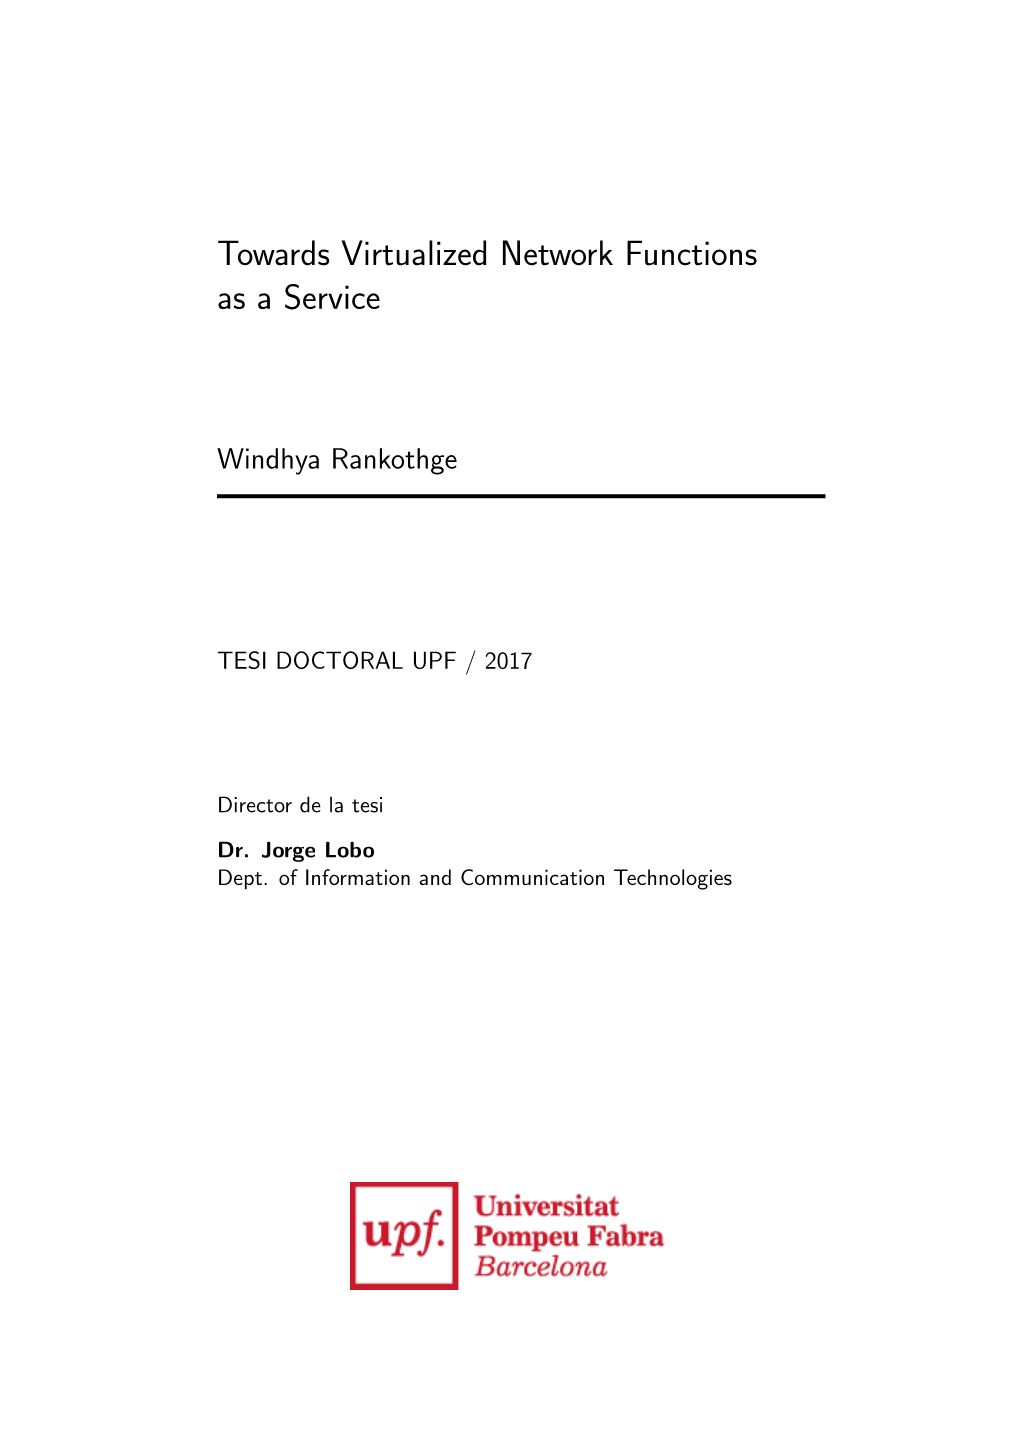 Towards Virtualized Network Functions As a Service